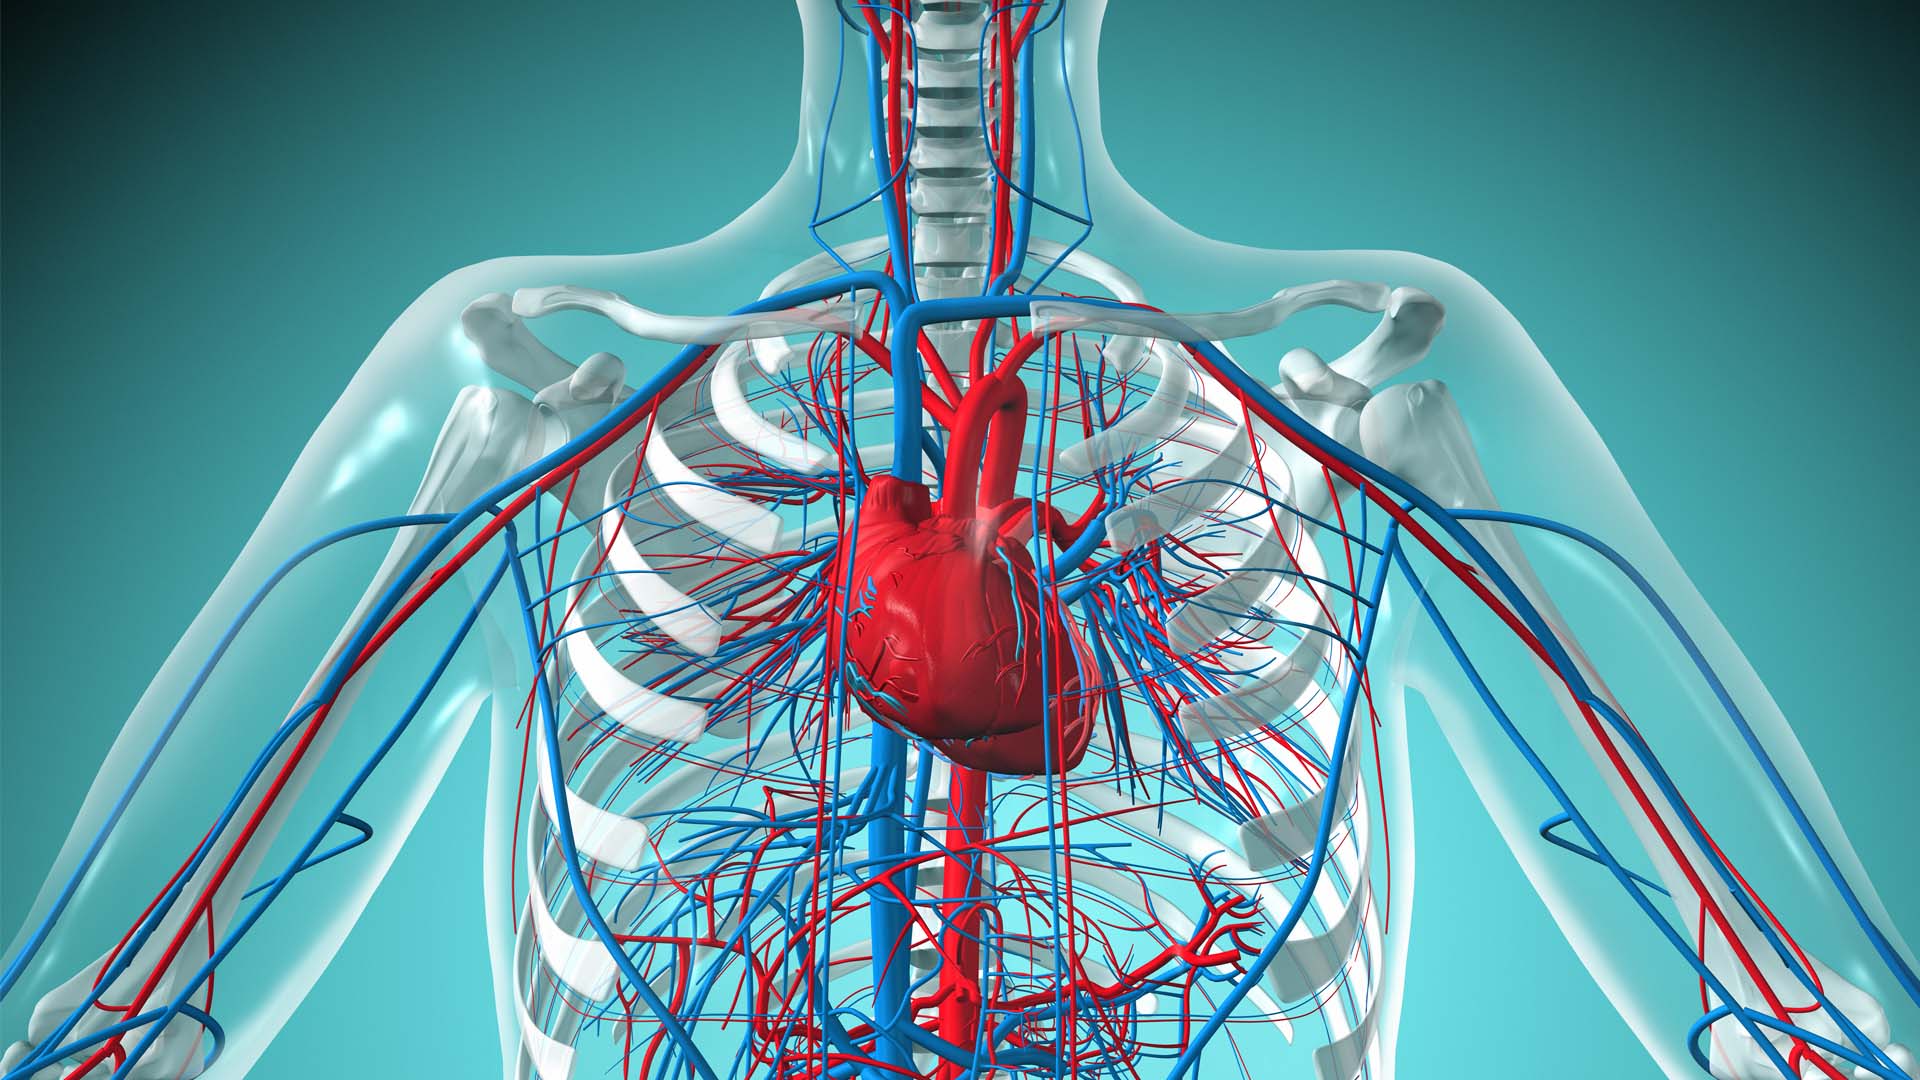 Identifying the Source of New Heart Vessels